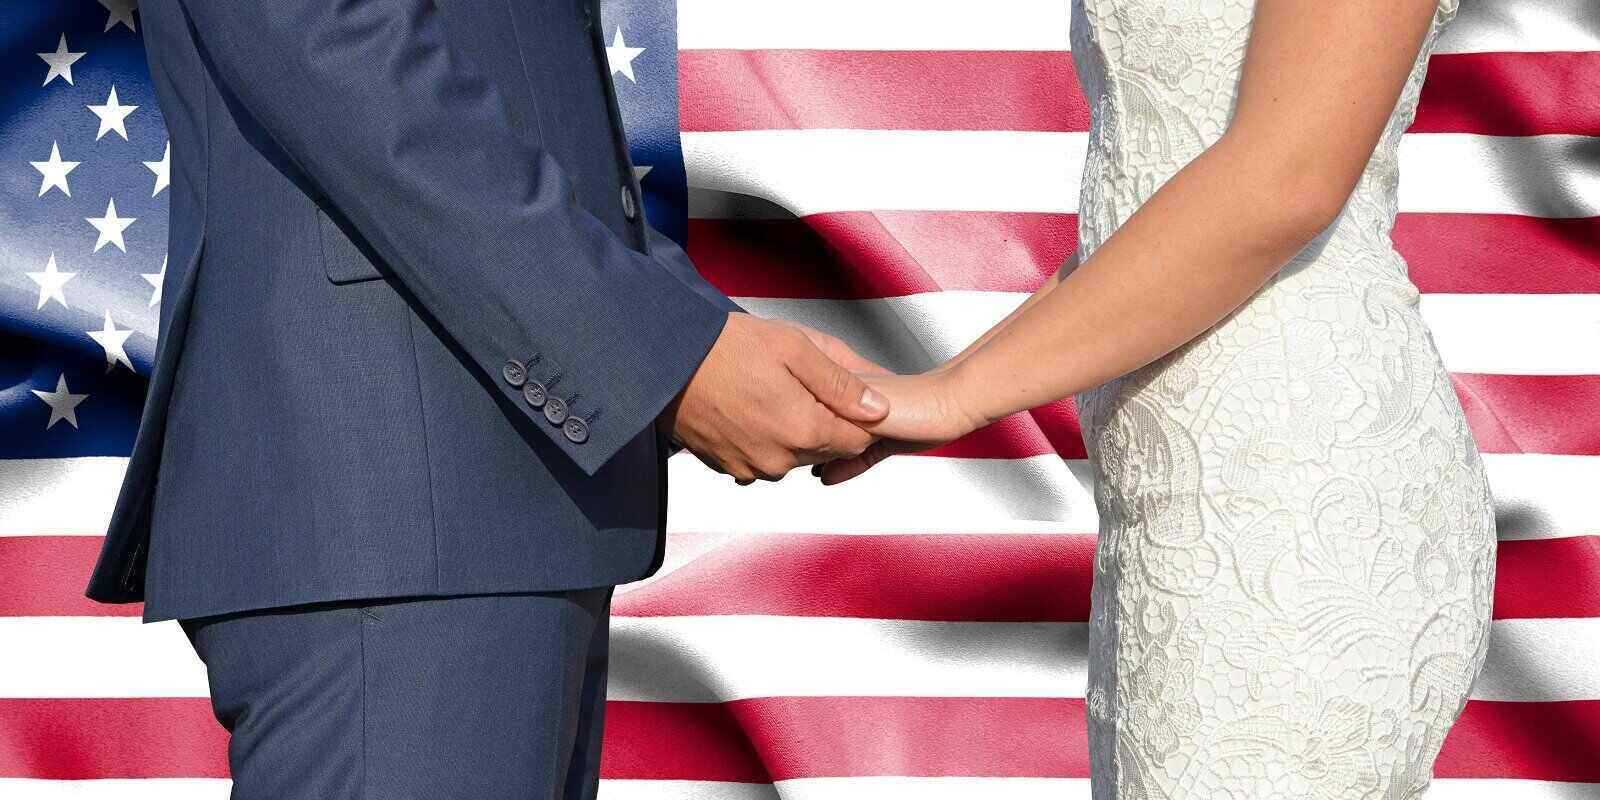 conceptual photograph of marriage in united states of america